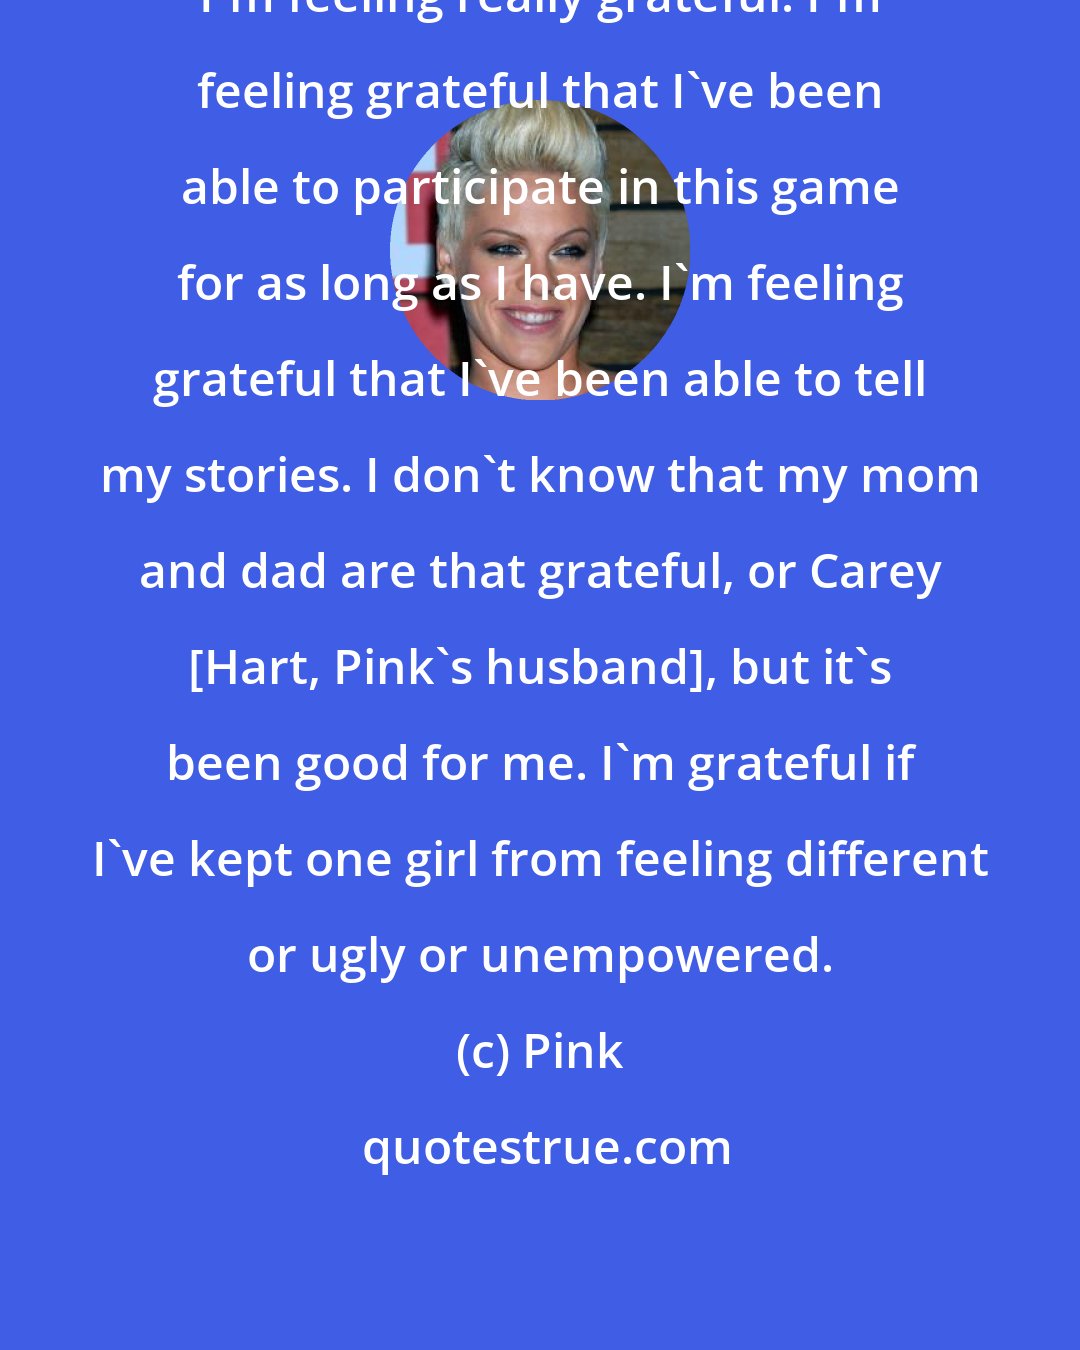 Pink: I'm feeling really grateful. I'm feeling grateful that I've been able to participate in this game for as long as I have. I'm feeling grateful that I've been able to tell my stories. I don't know that my mom and dad are that grateful, or Carey [Hart, Pink's husband], but it's been good for me. I'm grateful if I've kept one girl from feeling different or ugly or unempowered.